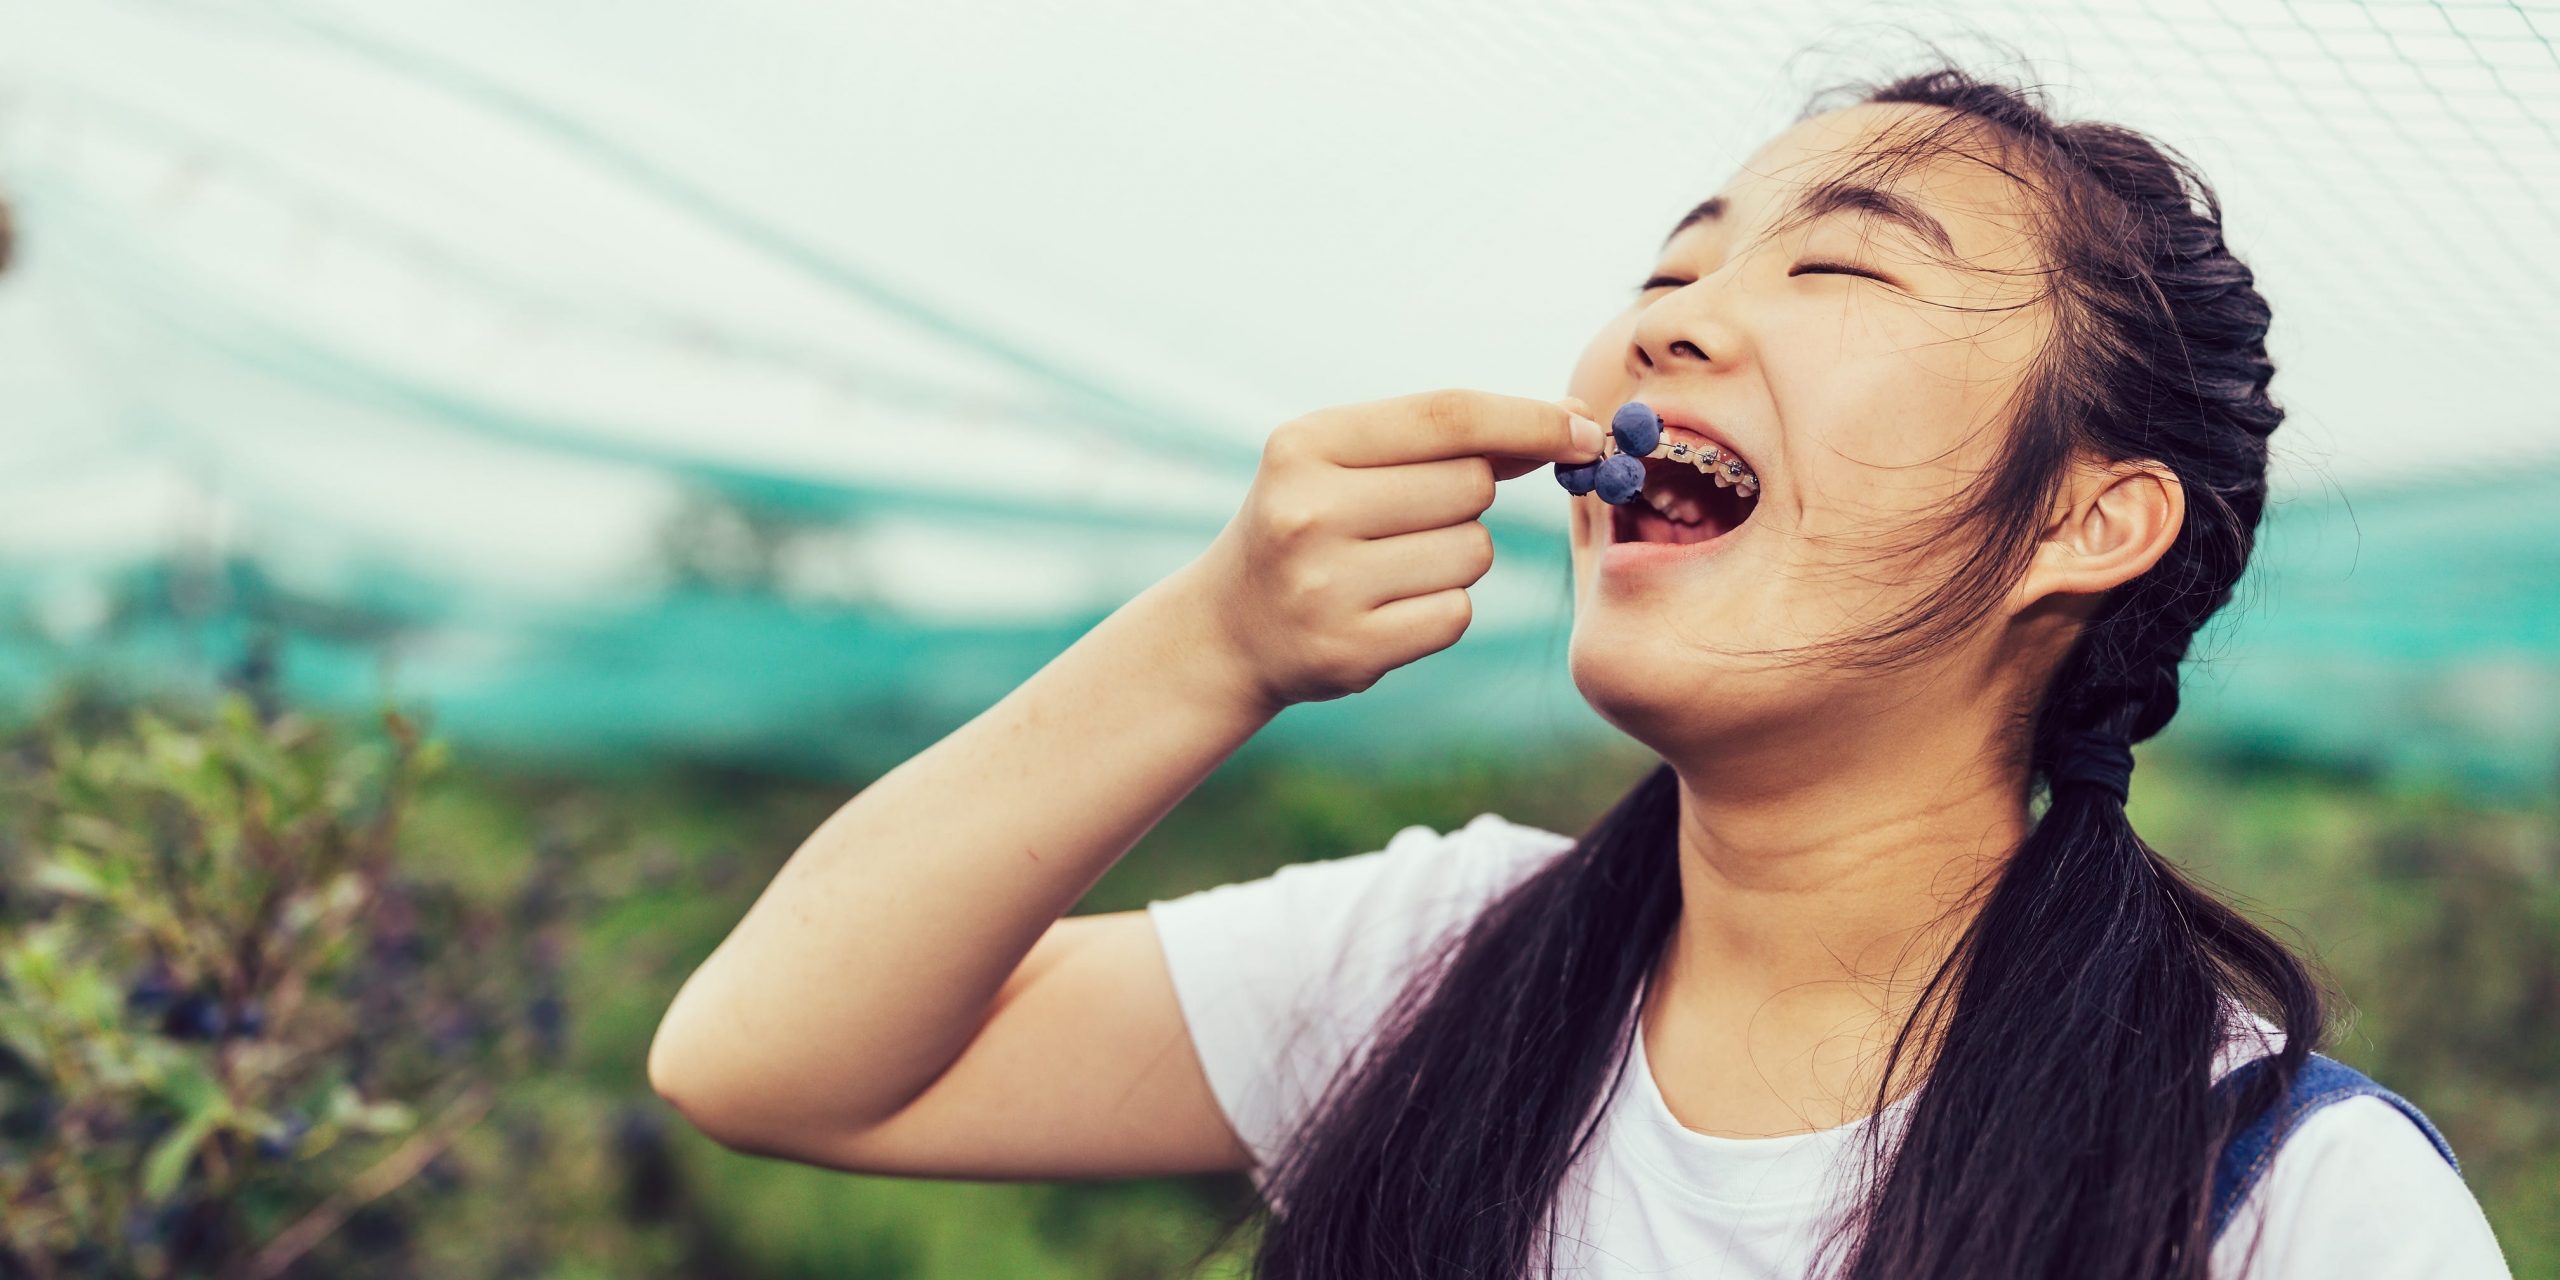 A teenager with braces eats fresh blueberries on a farm.